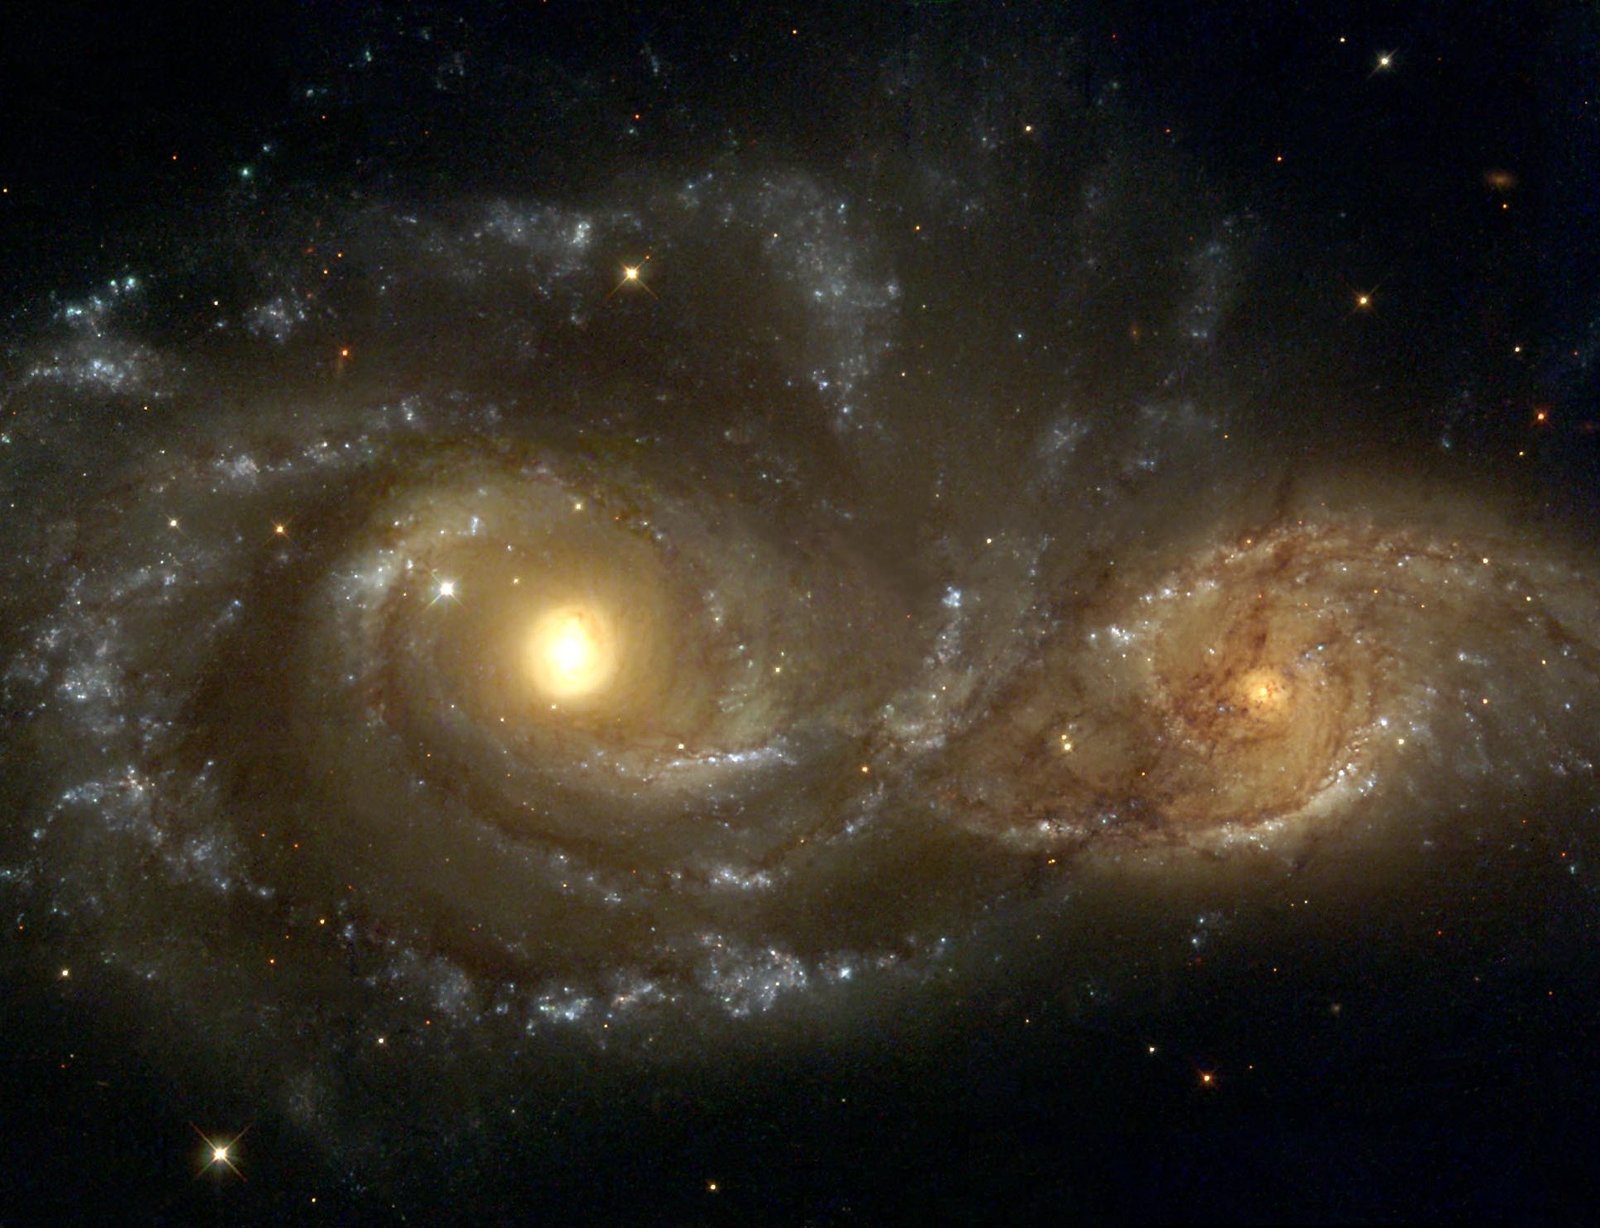 Collide of the two galaxies can change the structure of galaxies